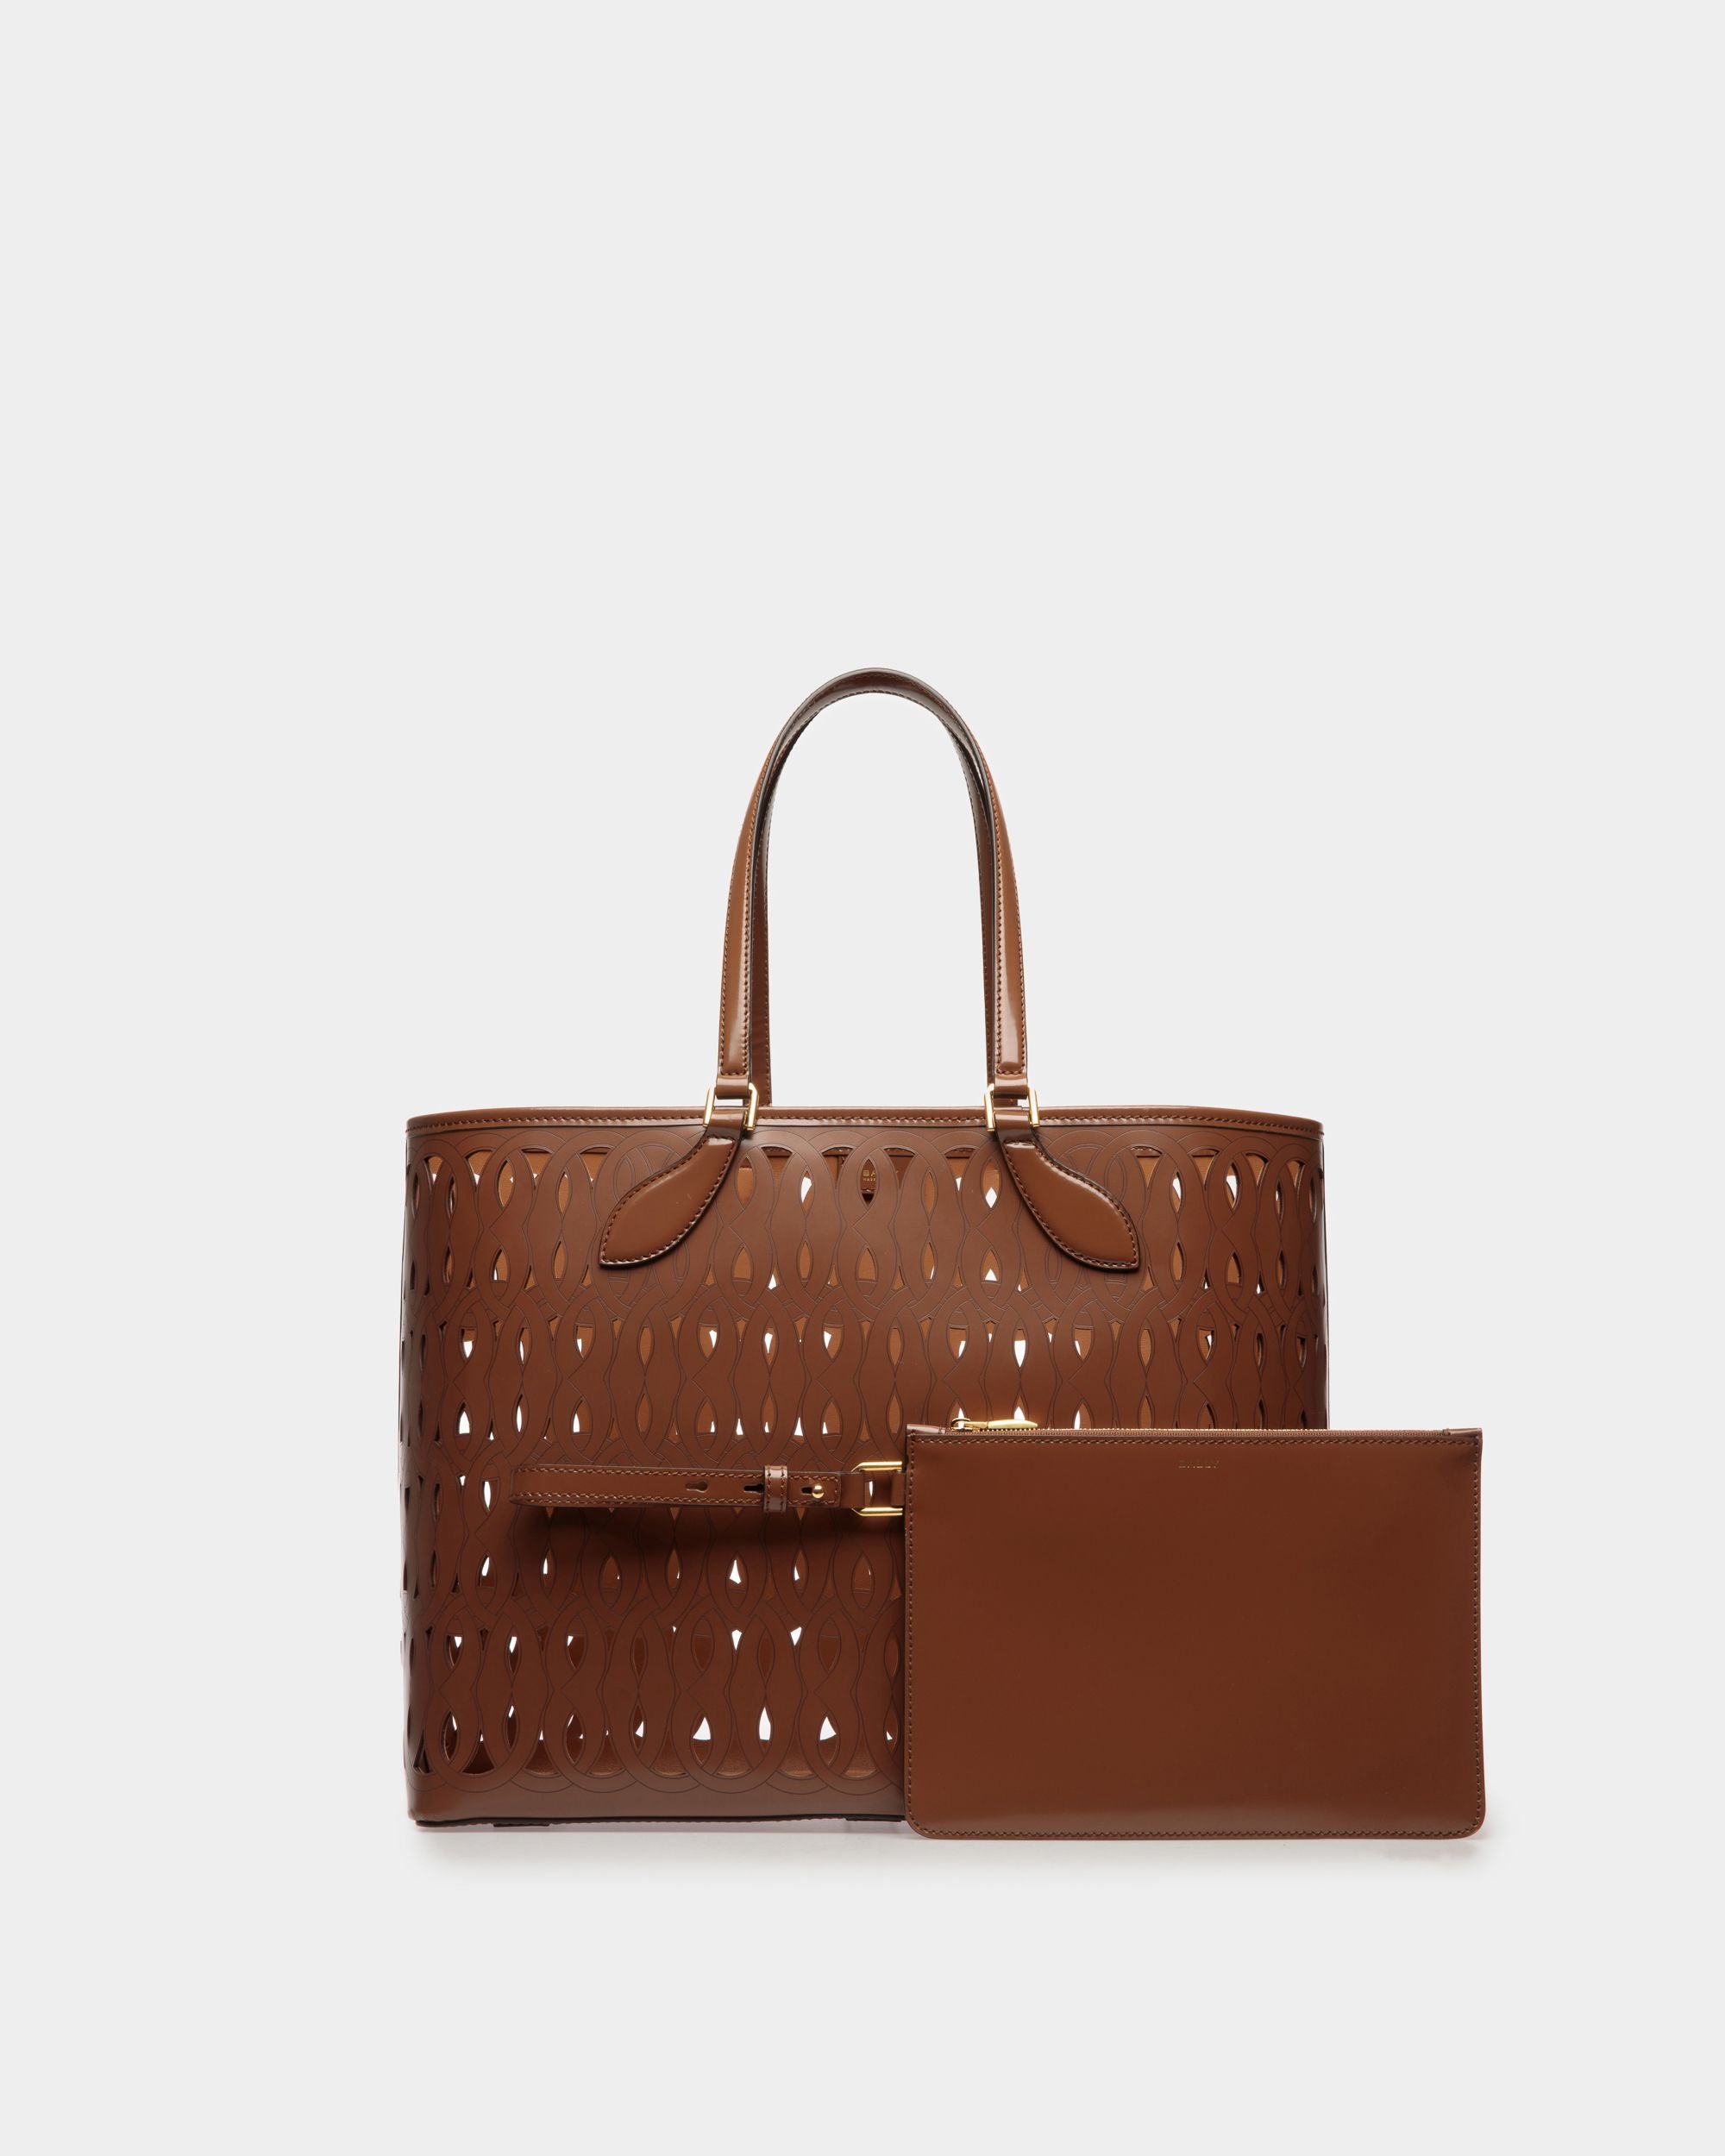 Lago | Women's Tote Bag | Brown Leather | Bally | Still Life Front